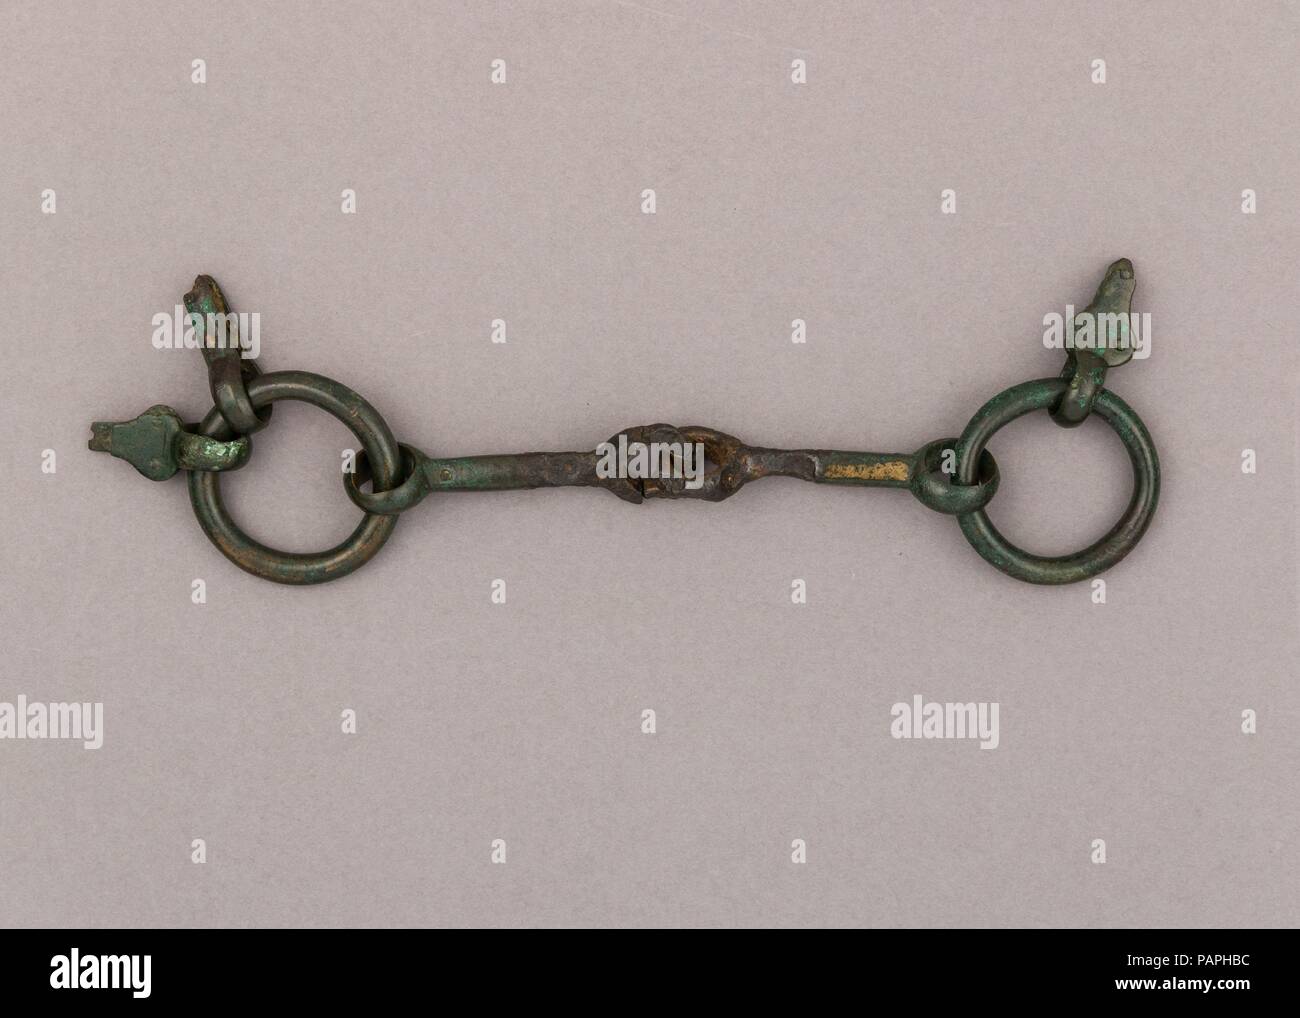 Snaffle Bit. Culture: Italian, Lombardy. Dimensions: W. 6 1/8 in. (15.6 cm); Wt. 7.9 oz. (224 g). Date: 4th-5th century.  The snaffle bit is the simplest type of horse bit, and has an effect on the bars (part of the horses' jaw without teeth) and the corners of the lips. The mouthpiece consists of two square-section canons, half in bronze, half in iron, articulated in the center. The side rings retain the pear-shaped tabs with rivets used for hanging the bit from the bridle and one remaining simple straight tab on one side for attaching one of the reins.  This bit is said to have been found in Stock Photo